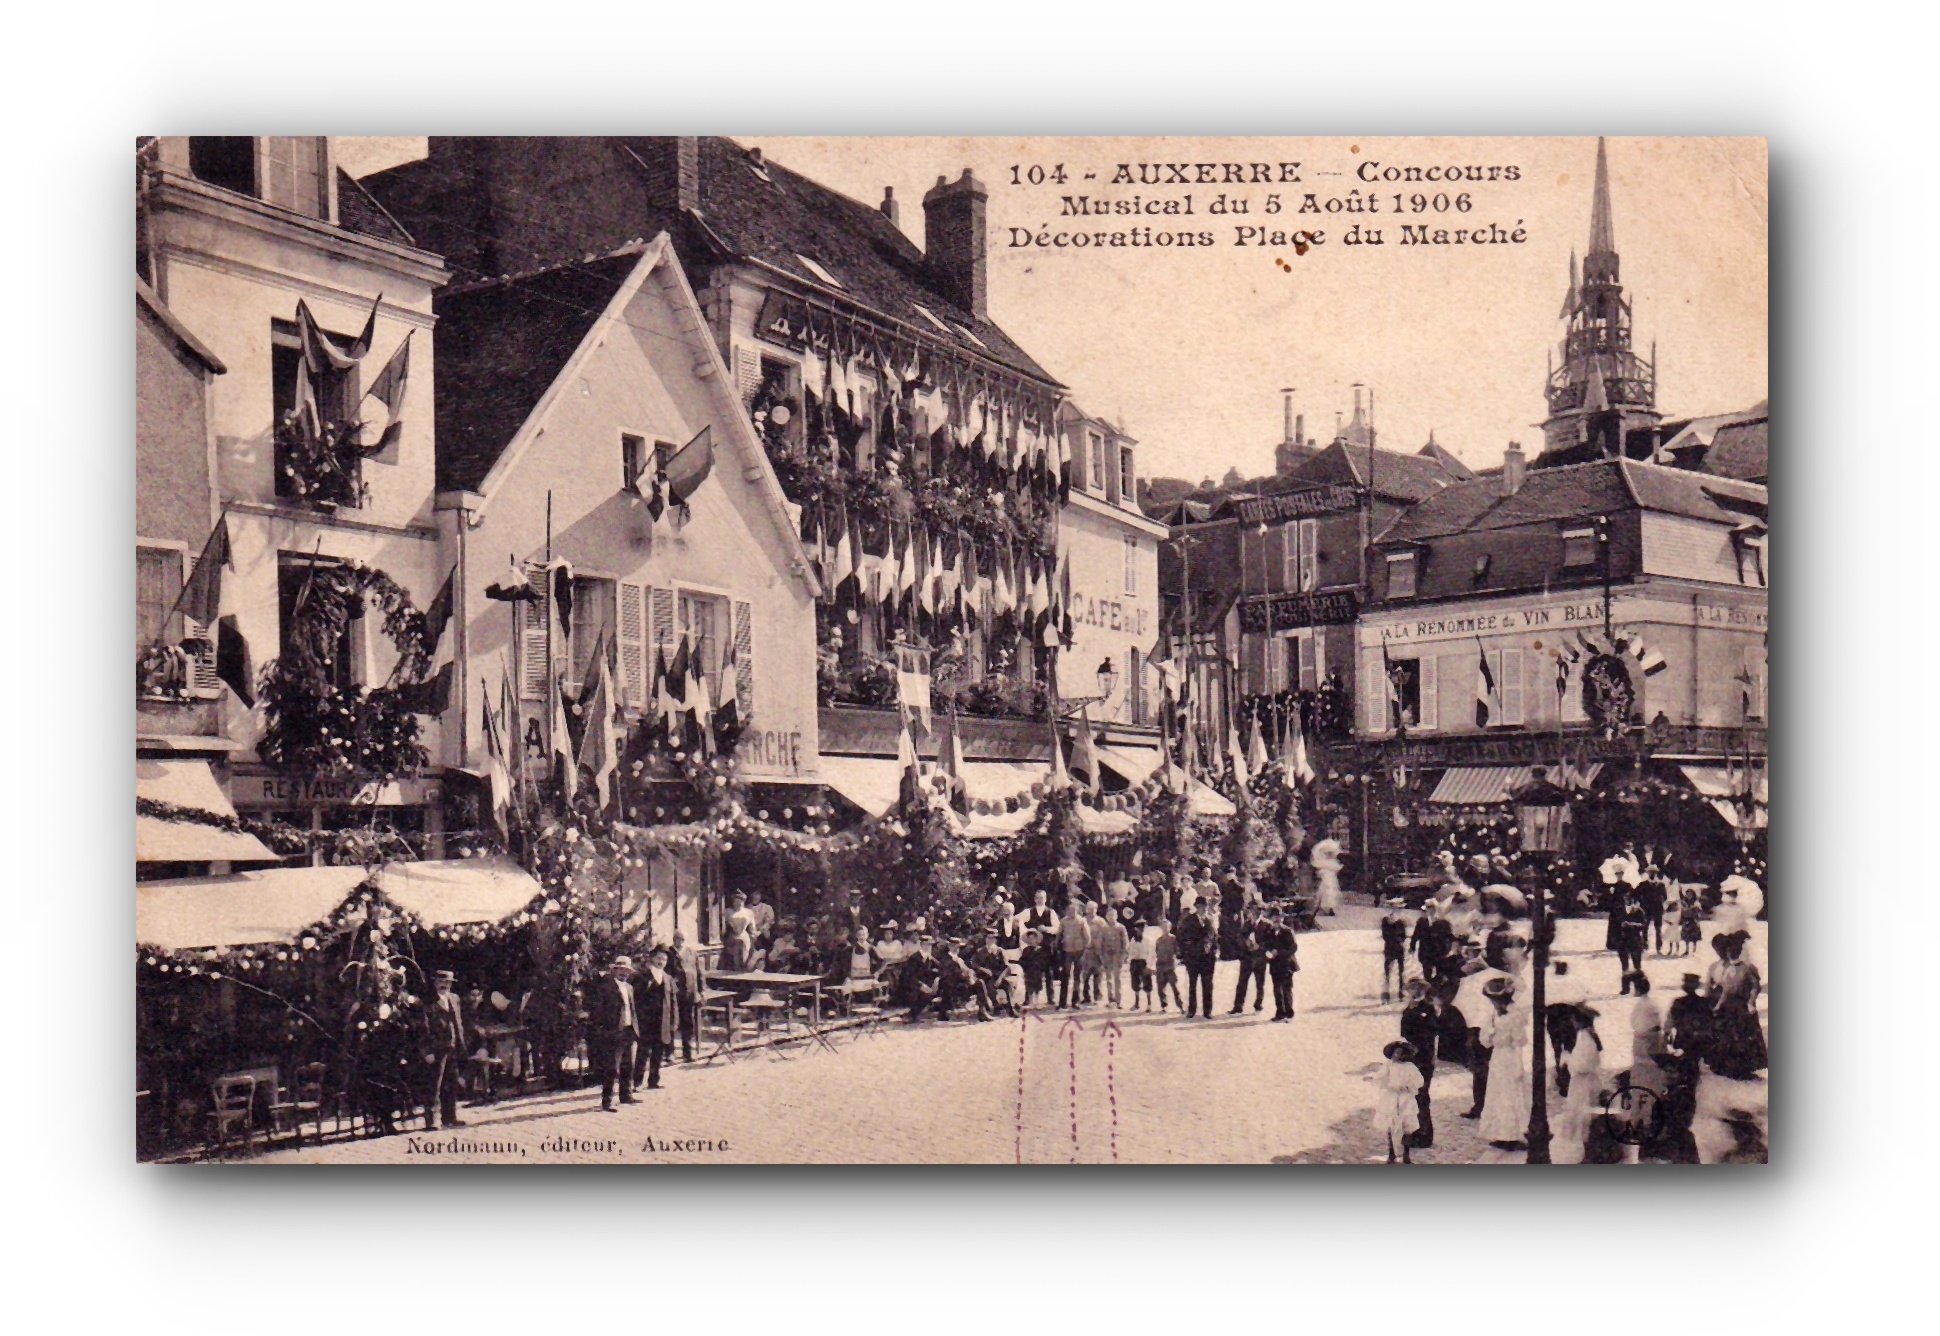 AUXERRE - Concours musical - 21.08.1906 - 